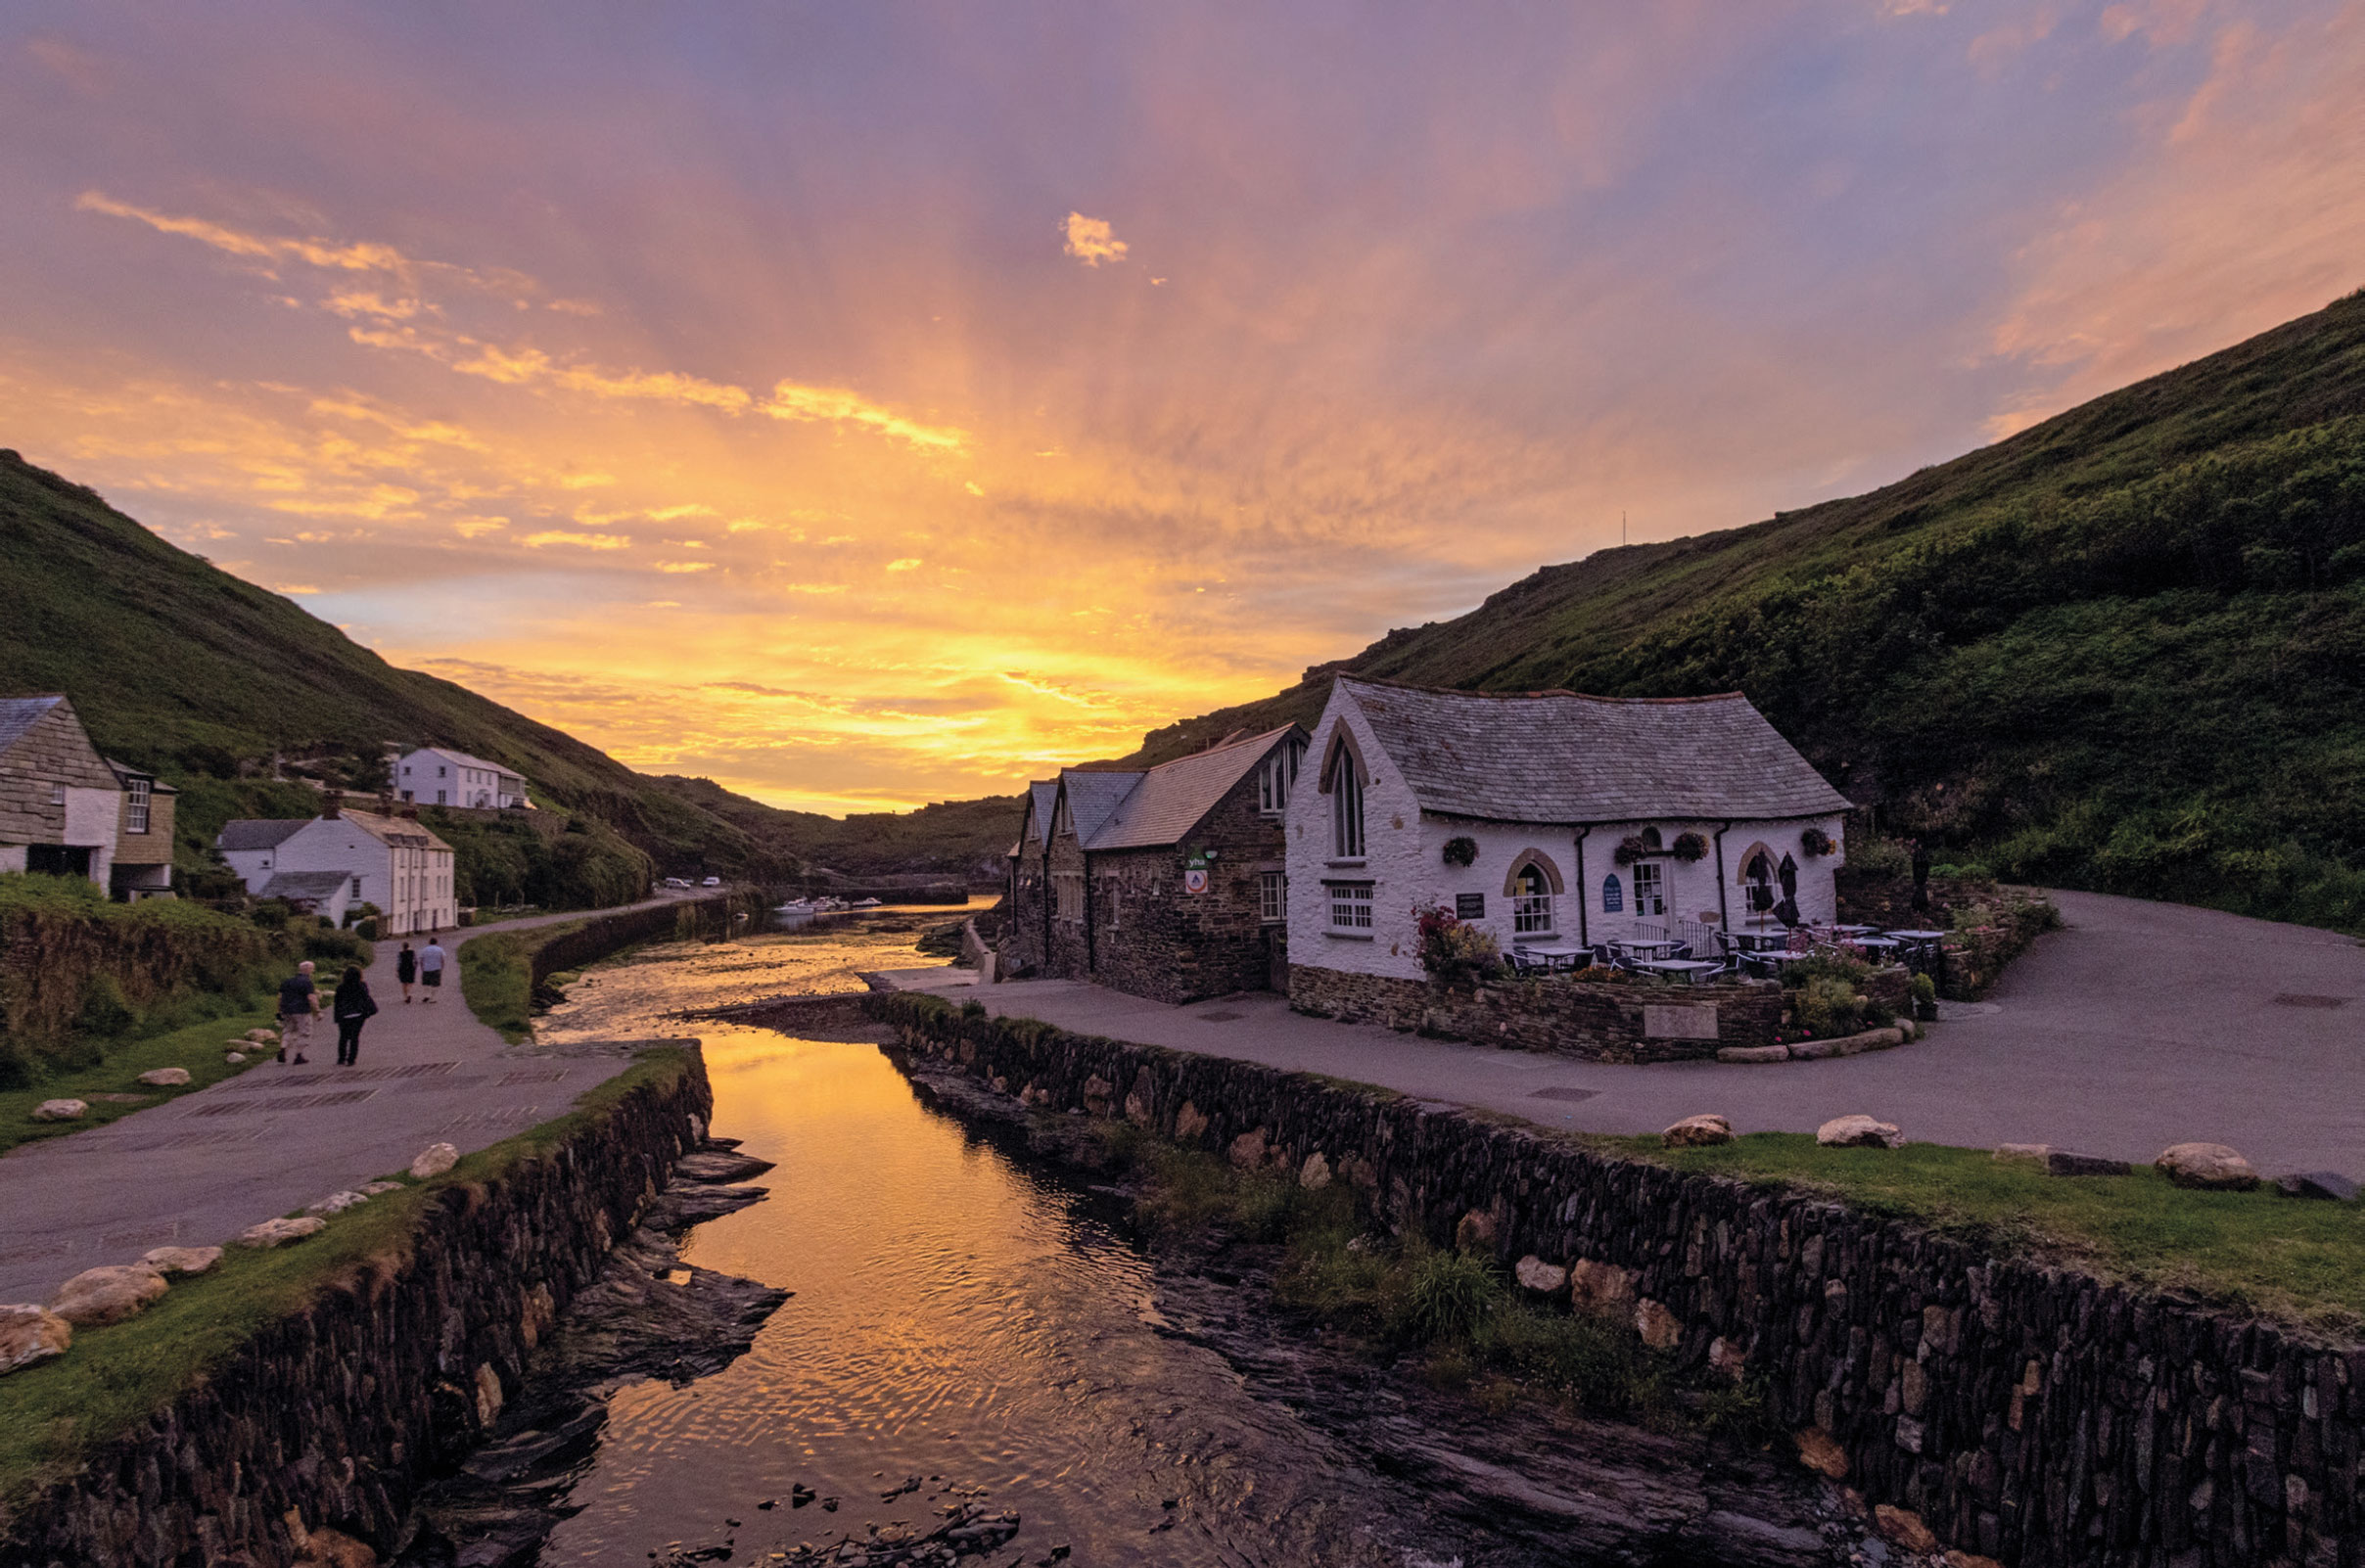 Boscastle Harbour Light building. This image was underexposed at the time of capture to retain the highlight detail in the sky. Canon EF-S 10-18mm f/4.5-5.6 IS STM, 1/160sec at f/7.1, ISO 800, Photo: Audley Jarvis